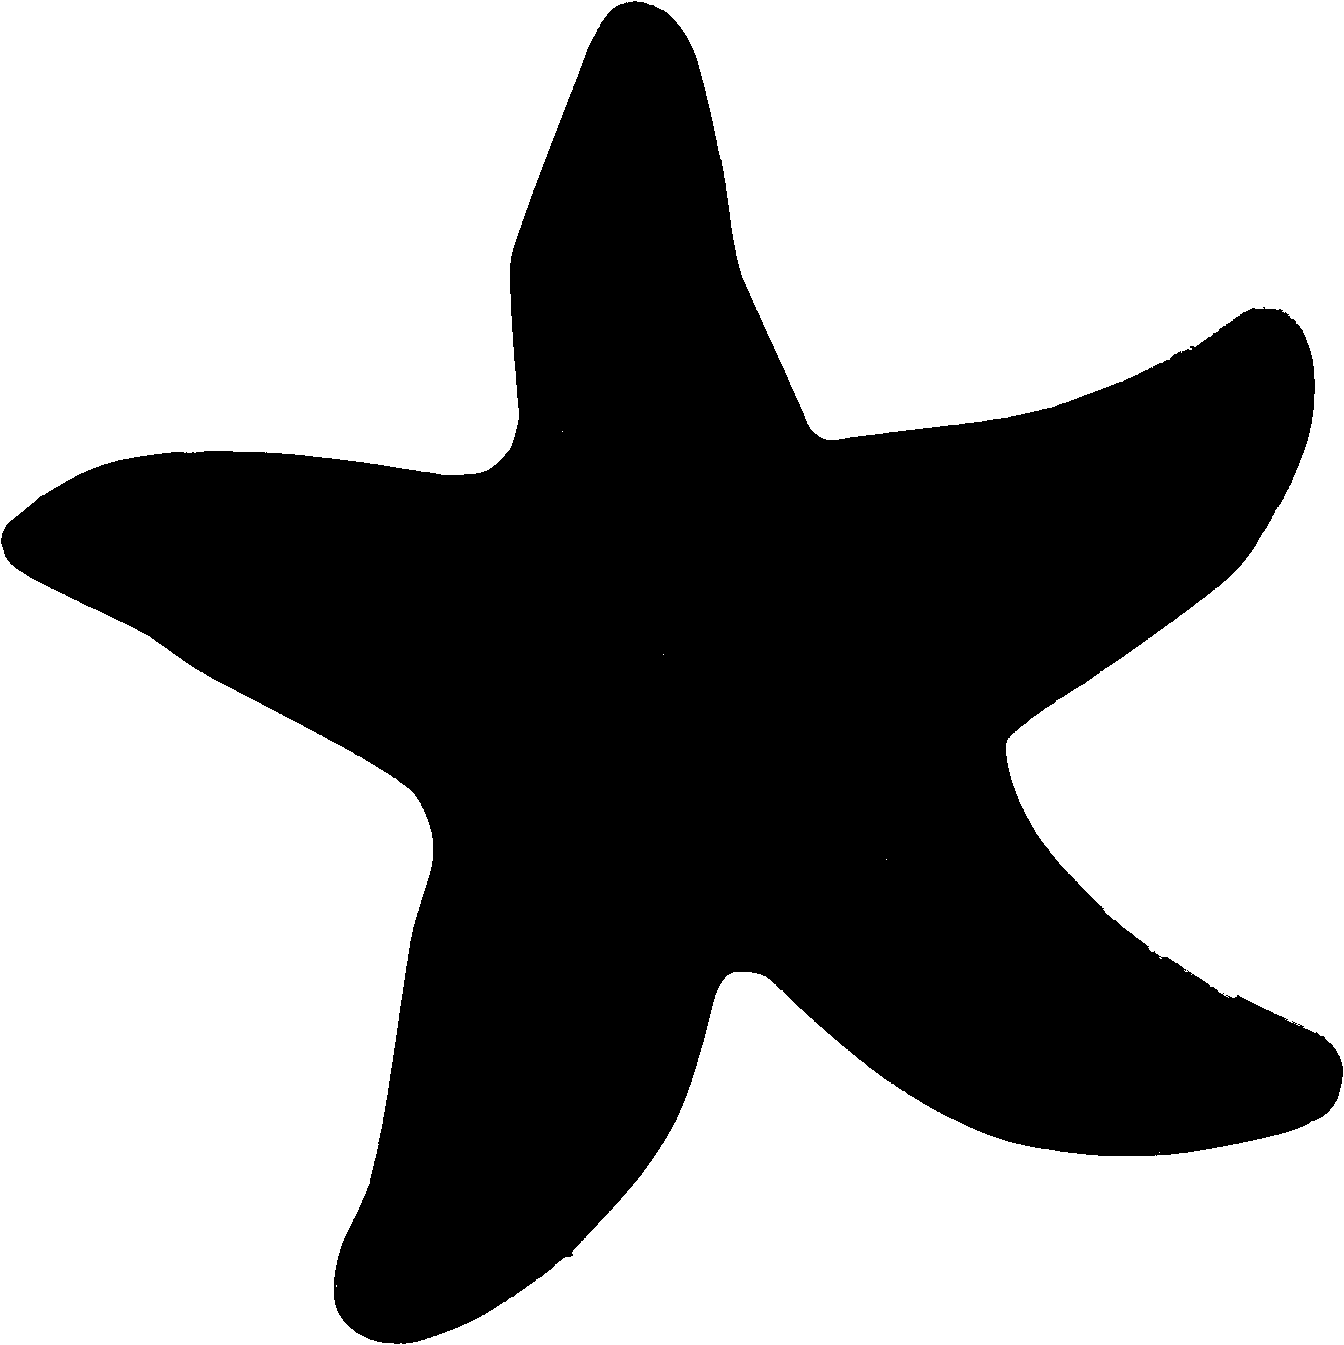 Starfish Outline Clip Art | Clipart library - Free Clipart Images